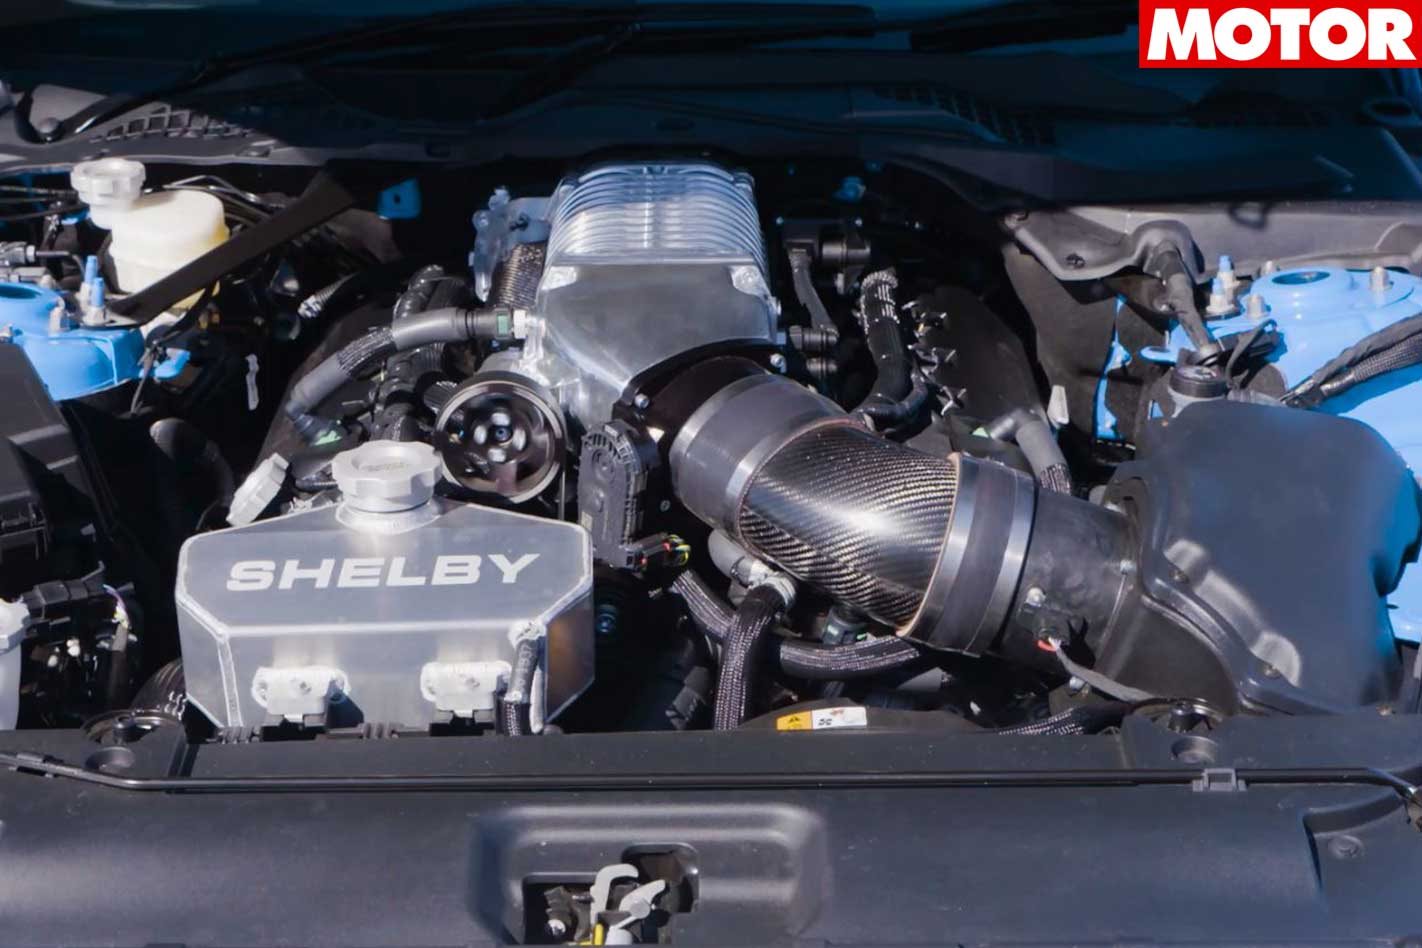 2017 Shelby Super Snake supercharged engine